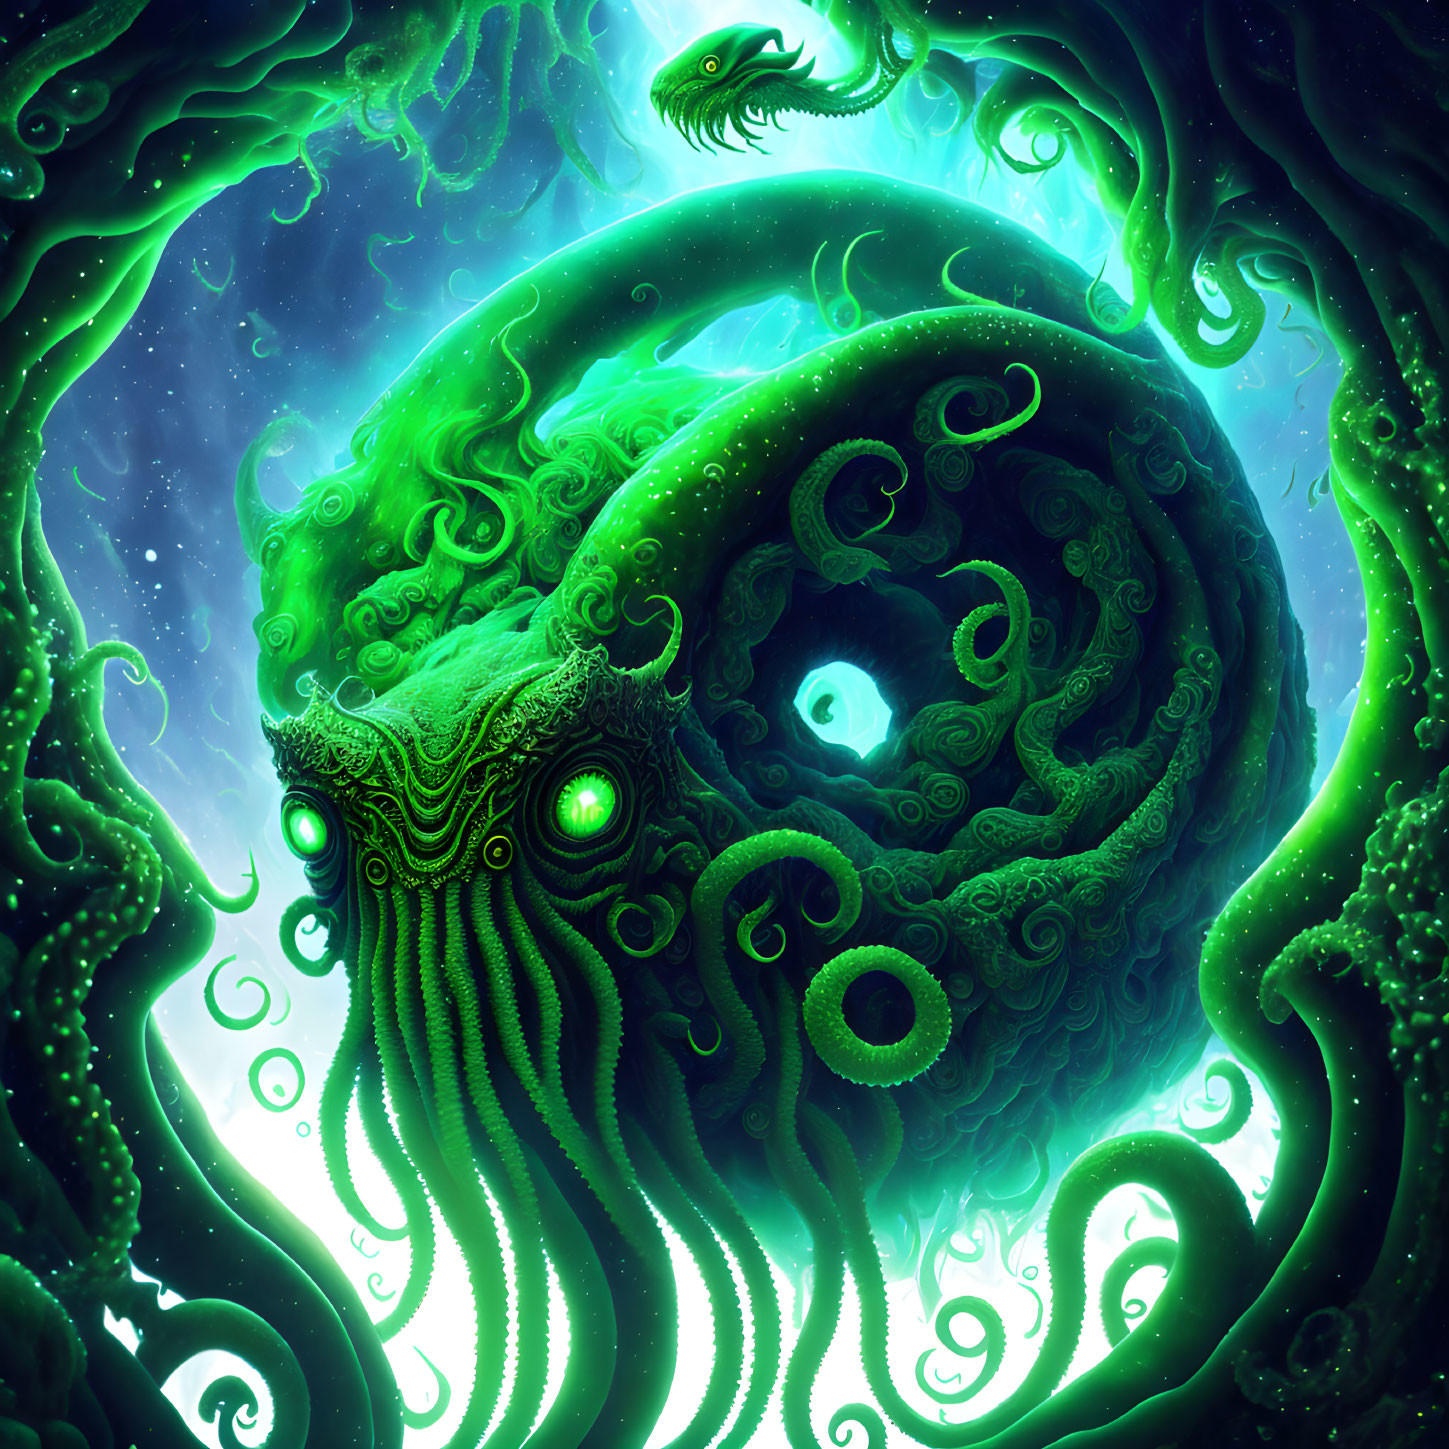 Colorful mythical green creature with glowing eyes and tentacles in blue light.